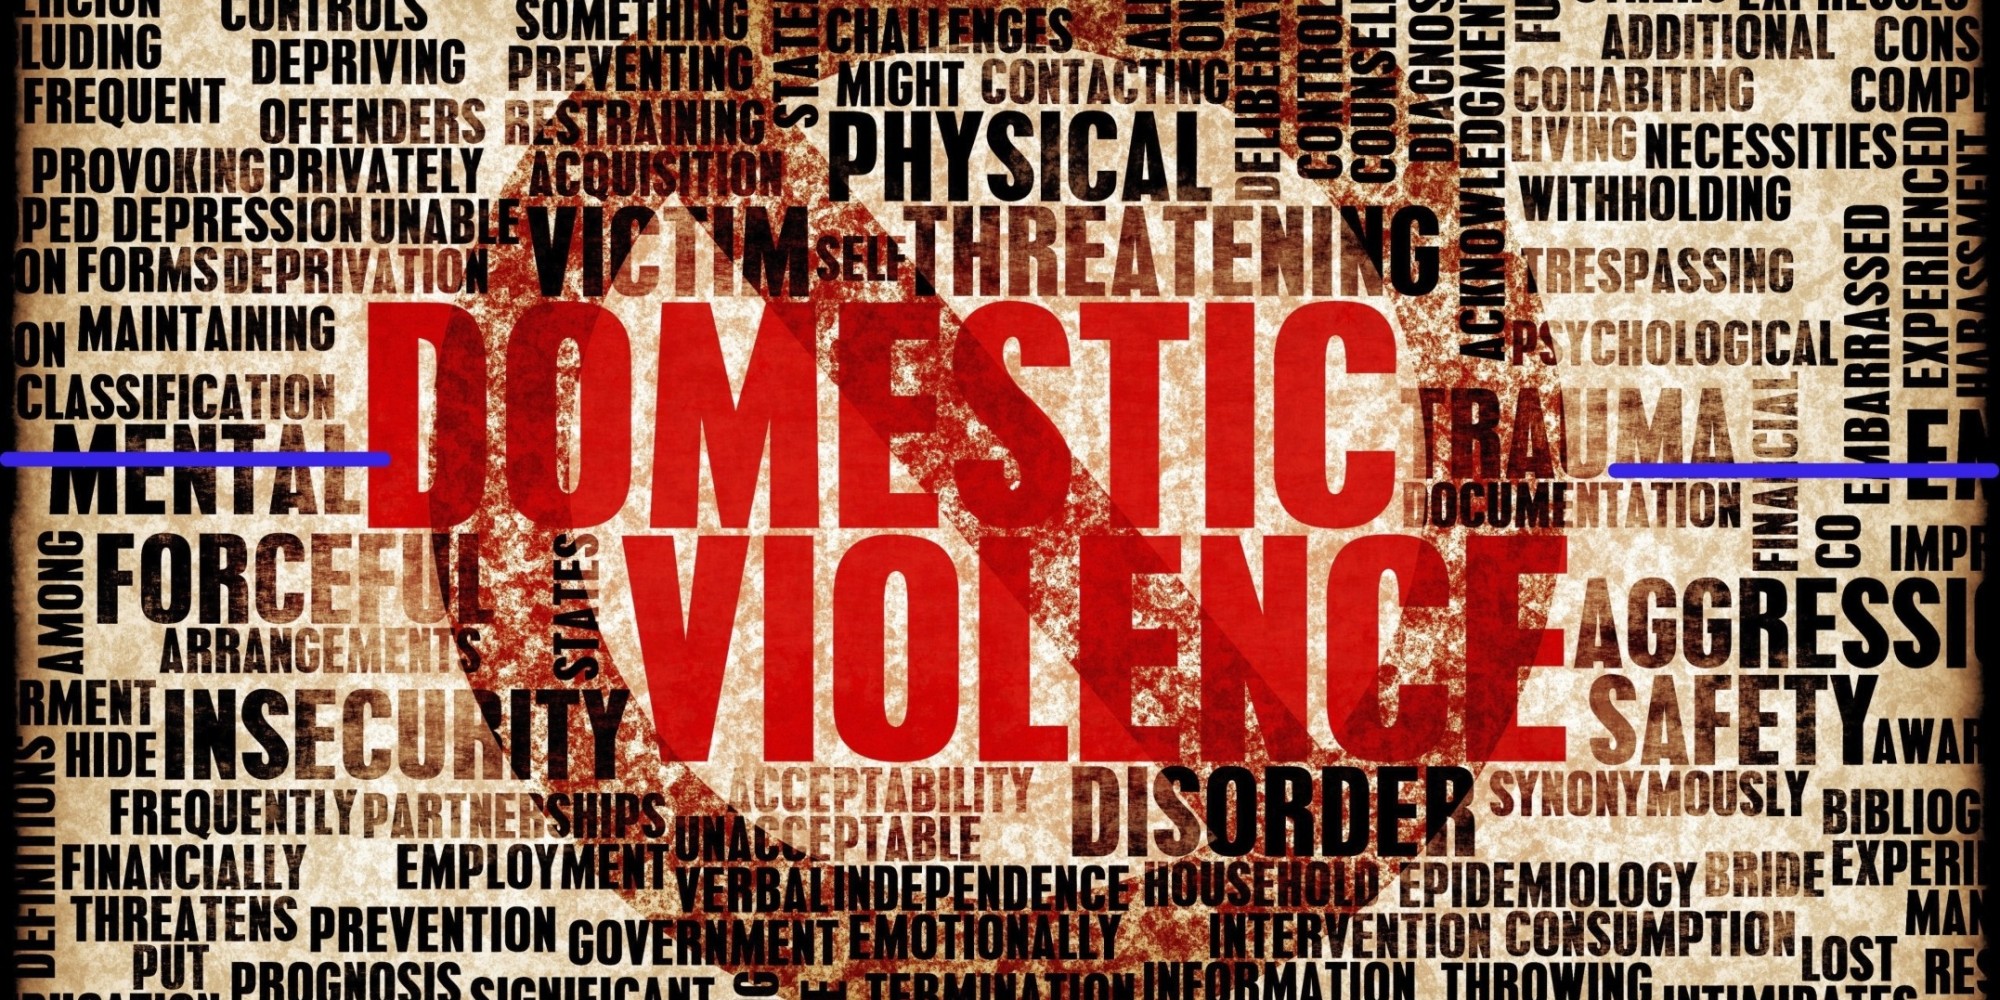 Men Should Speak Out On Domestic Abuse – Retired Judge